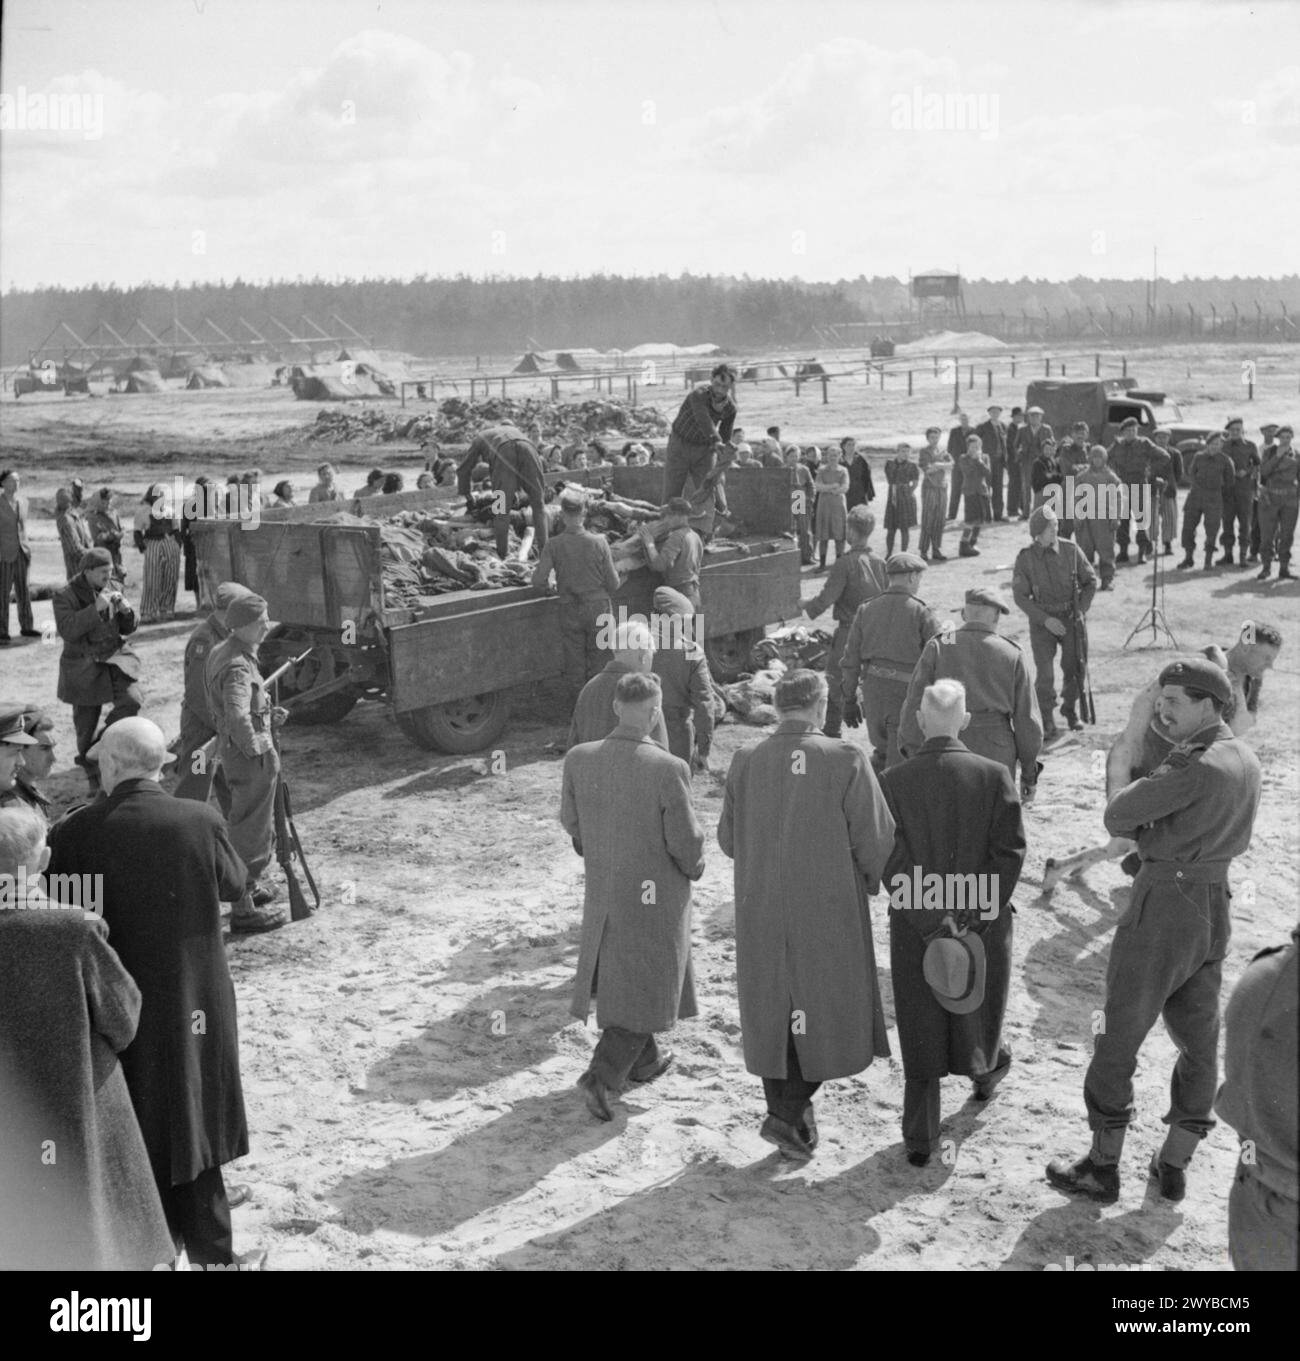 THE LIBERATION OF BERGEN-BELSEN CONCENTRATION CAMP, APRIL 1945 - Camp inmates watch German SS guards load a lorry with bodies of the dead. In the foreground, British Army officers escort a party of civilian visitors to the camp. , Stock Photo